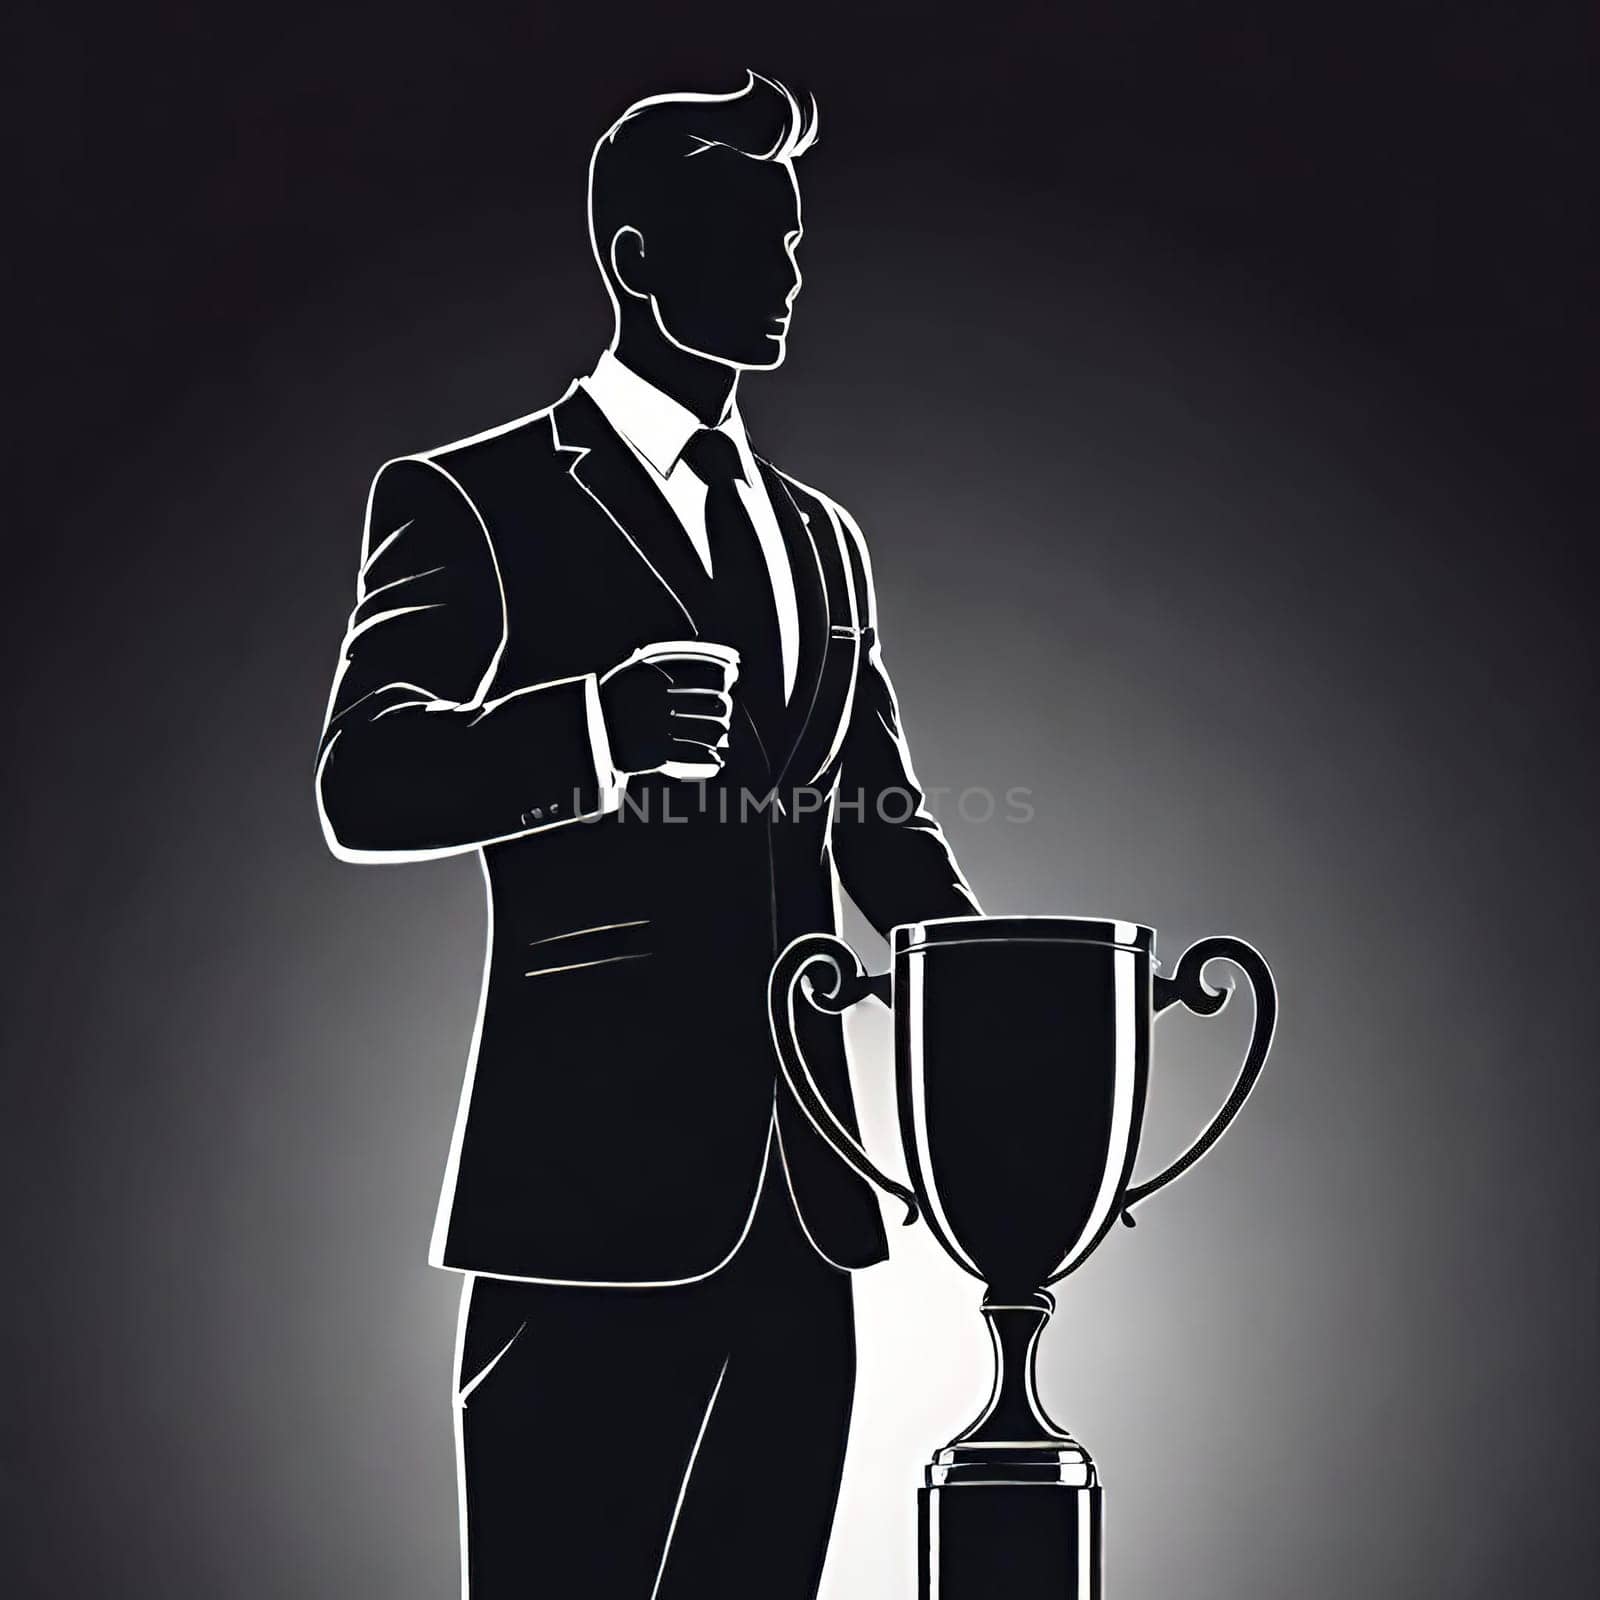 Silhouette of a businessman holding a trophy on a pedestal.Businessman holding a trophy on background. Vector illustration.Businessman on the podium with a trophy .